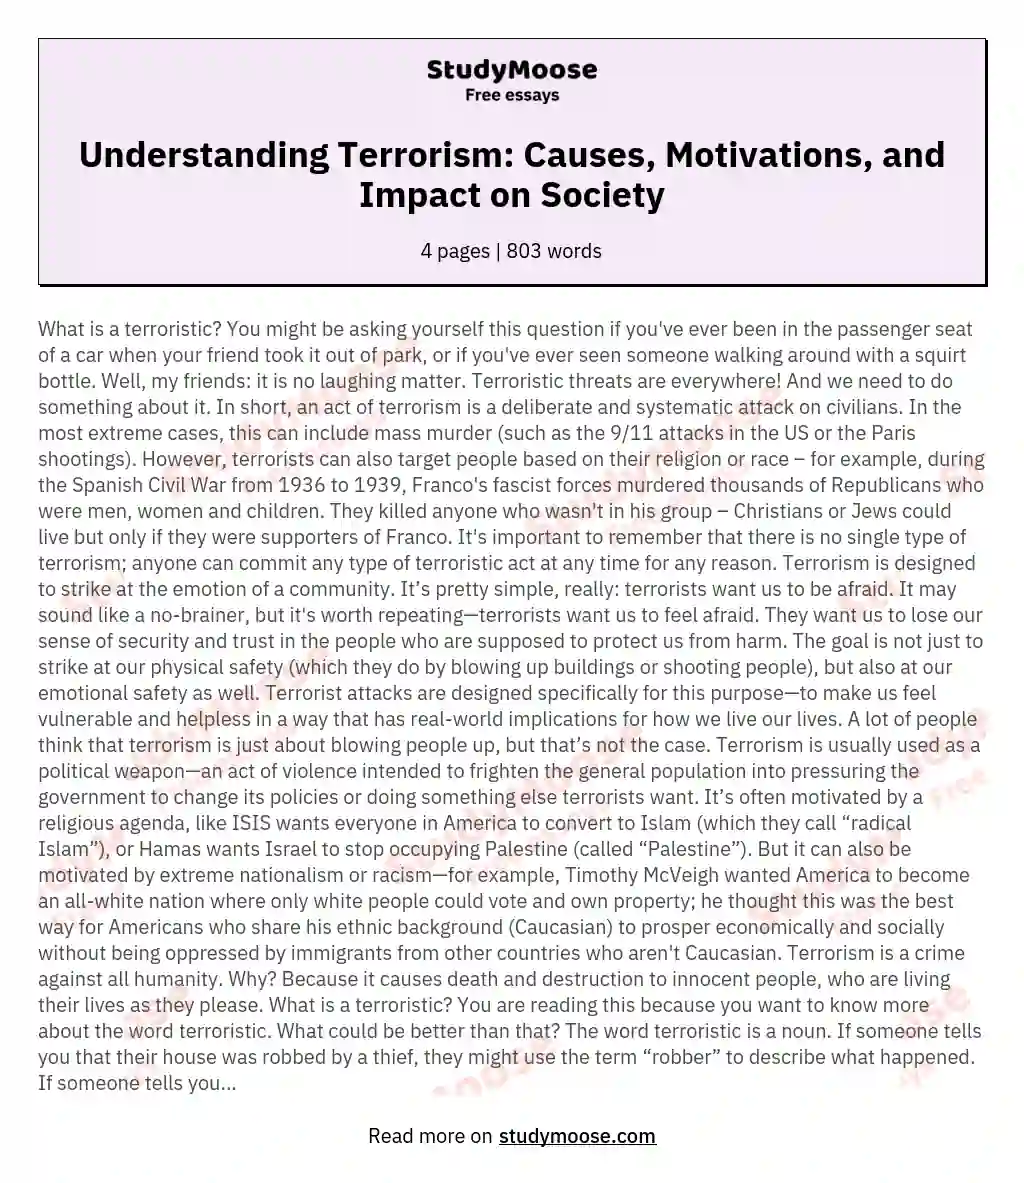 Understanding Terrorism: Causes, Motivations, and Impact on Society essay